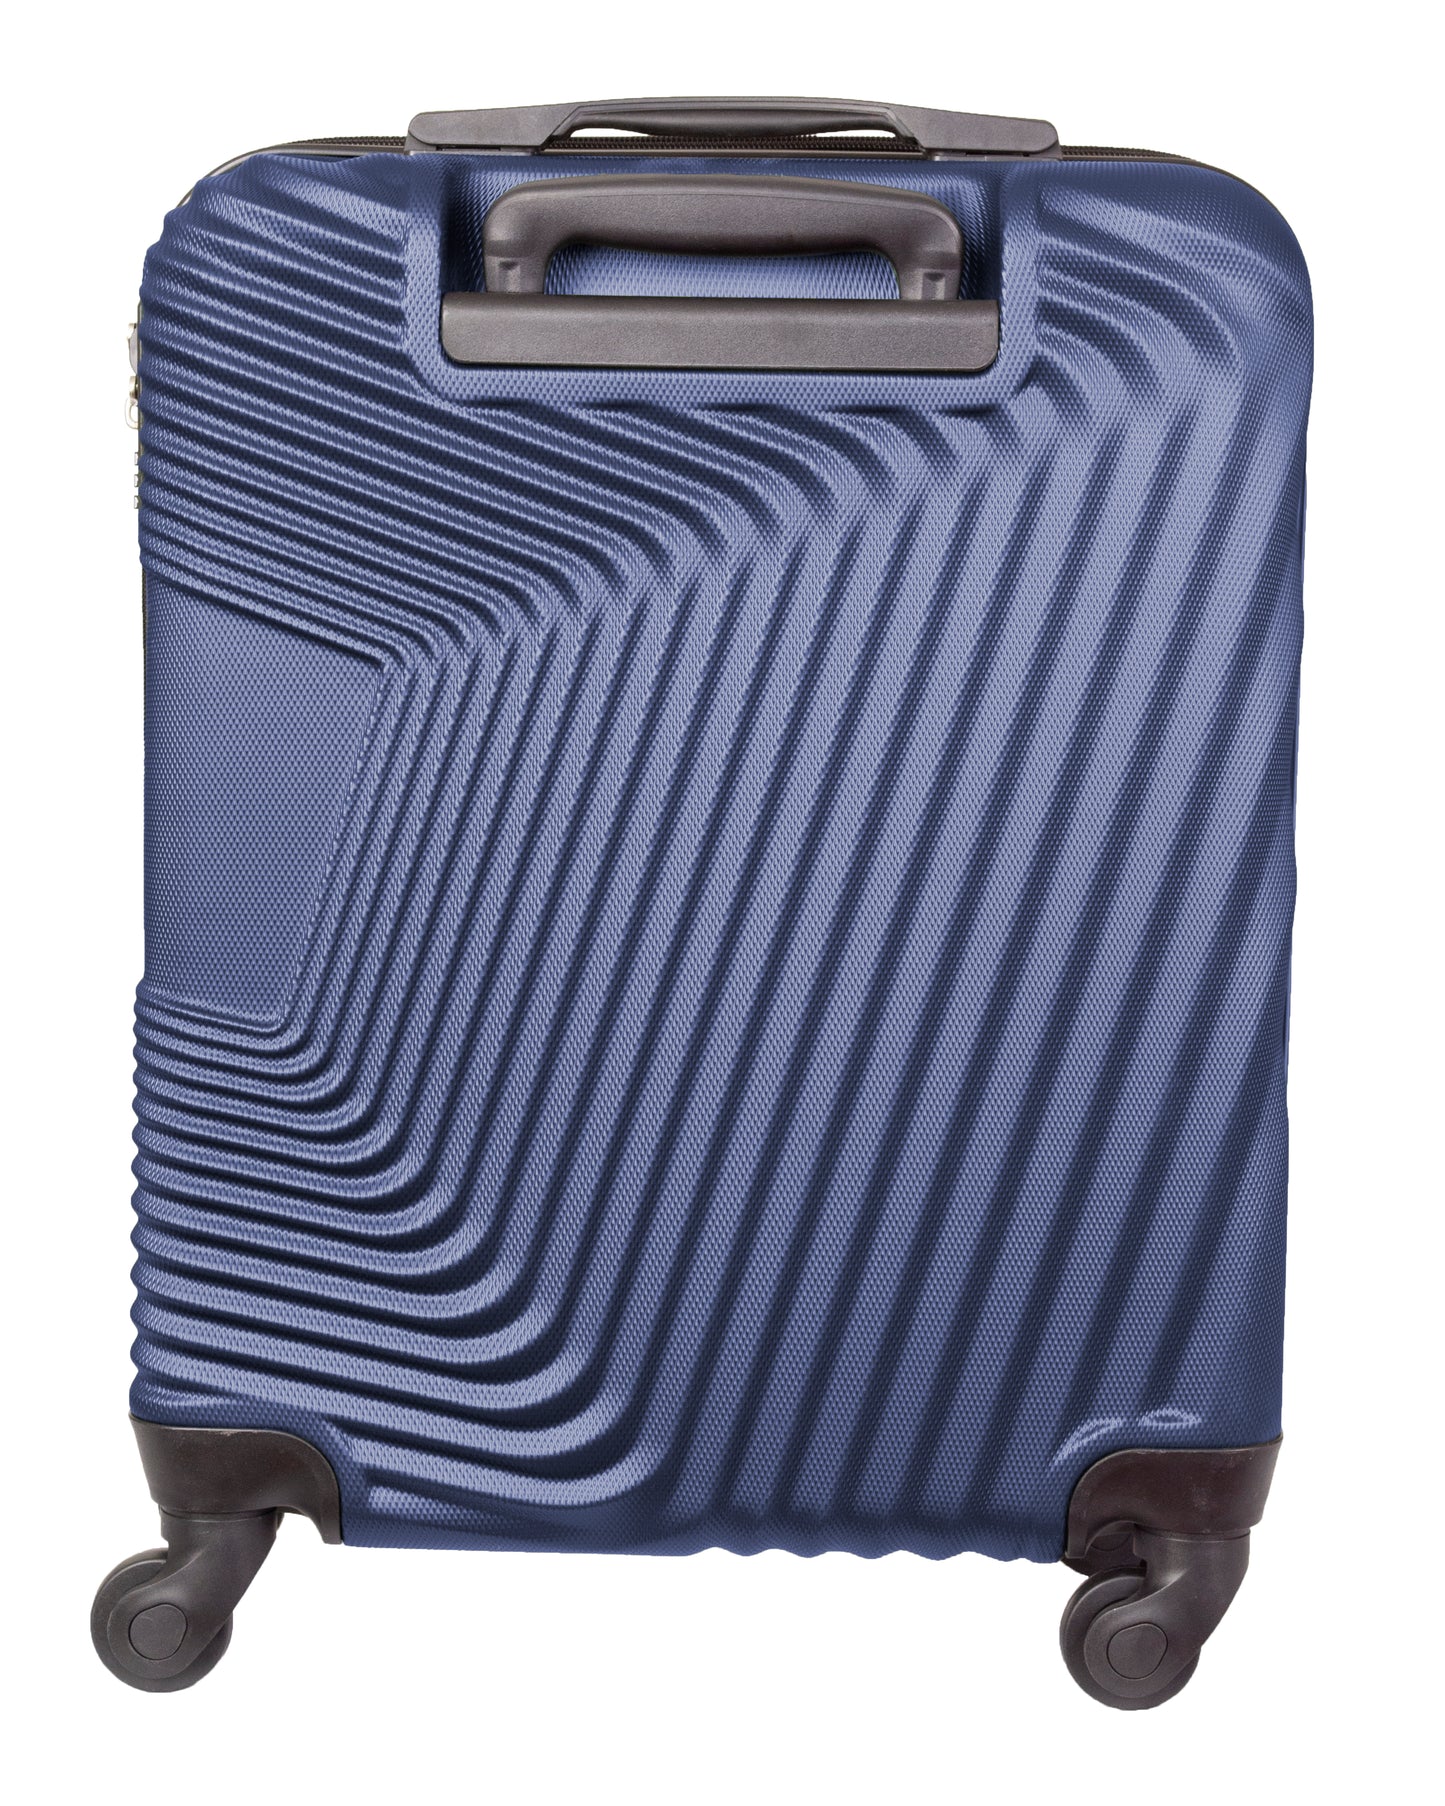 Cabin Size ABS Suitcase Hard Shell Luggage 20"